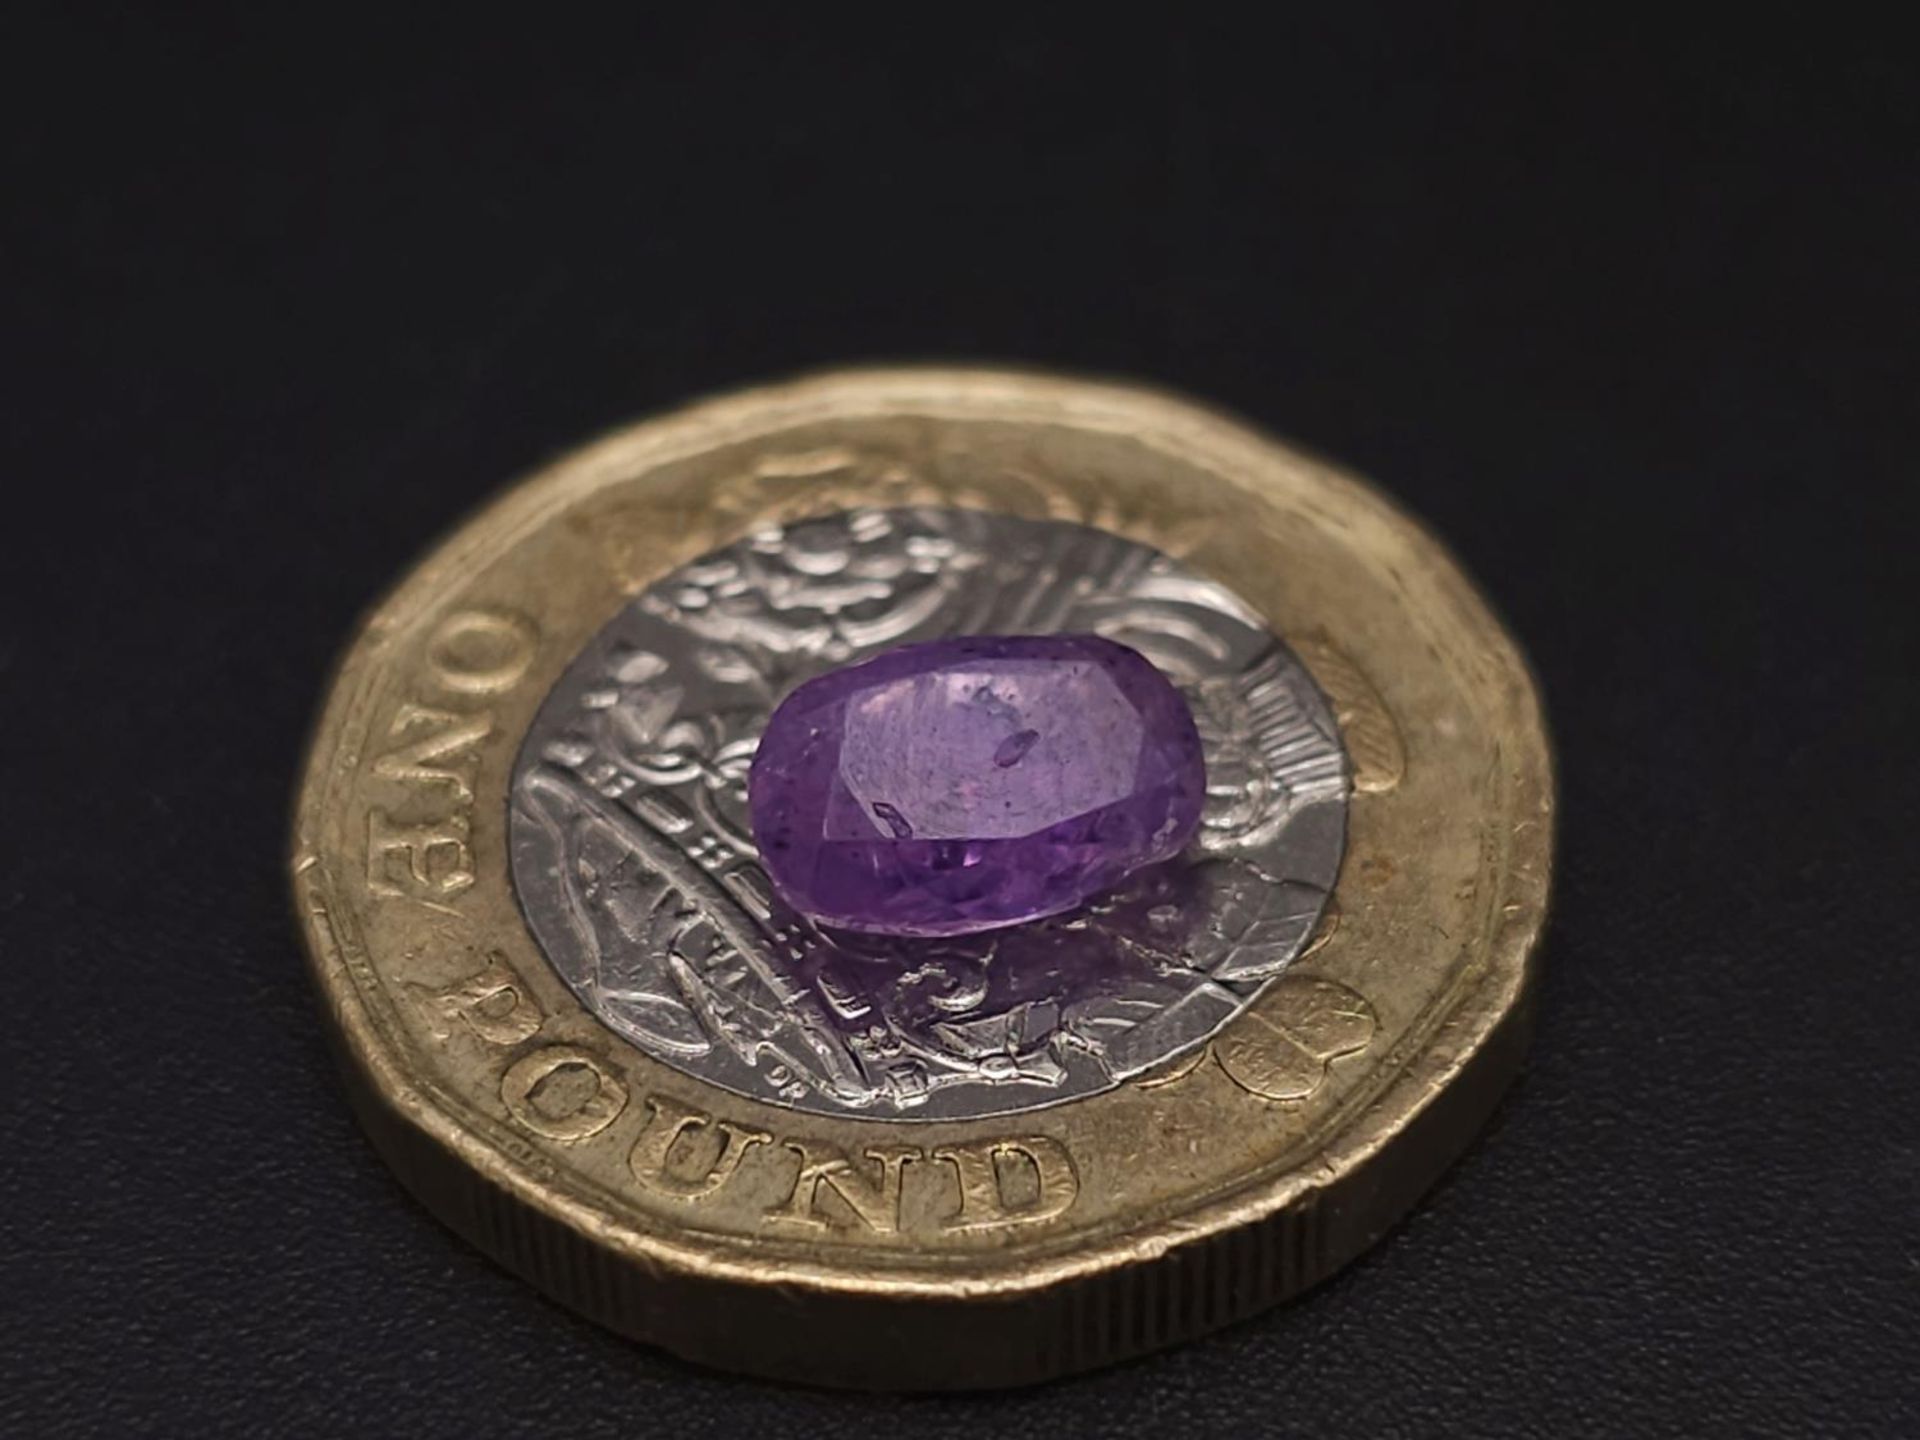 A 1.81ct Rare Untreated Kashmir Pink Violet Sapphire - GFCO Swiss Certified. - Image 4 of 4